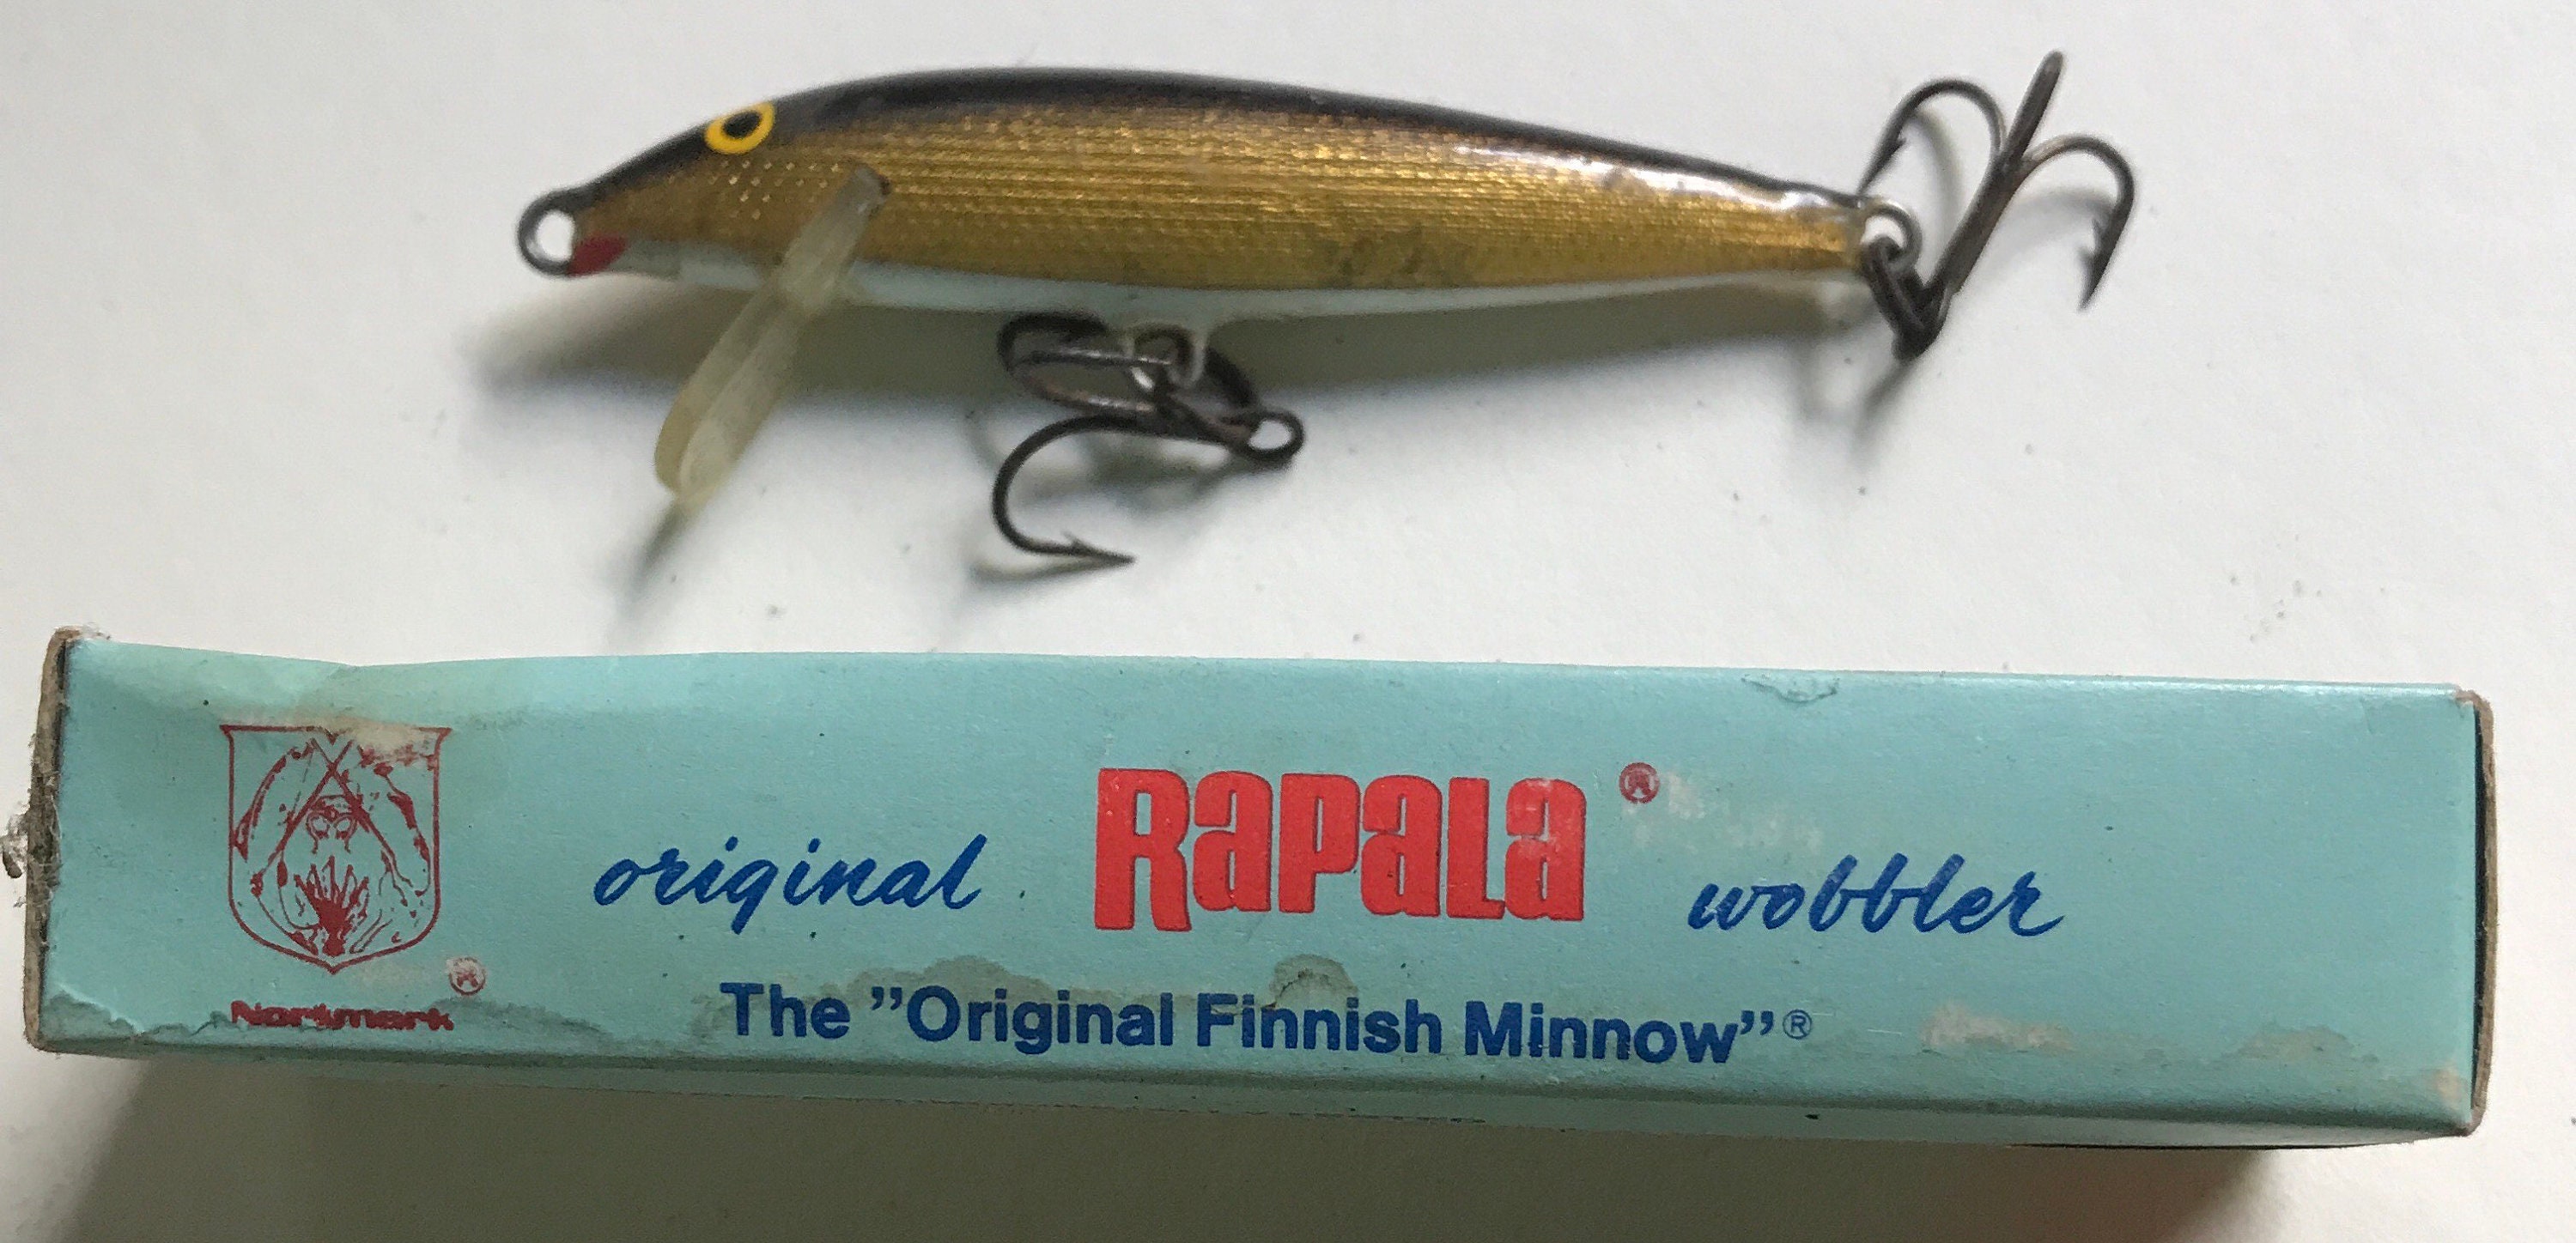 RAPALA: the Original Finnish Minnow. Finland. 3 Lures, Saltwater and Fresh  in 3 Sizes. 1970s. Bobs Bait Shop, LI. Free Shipping. 